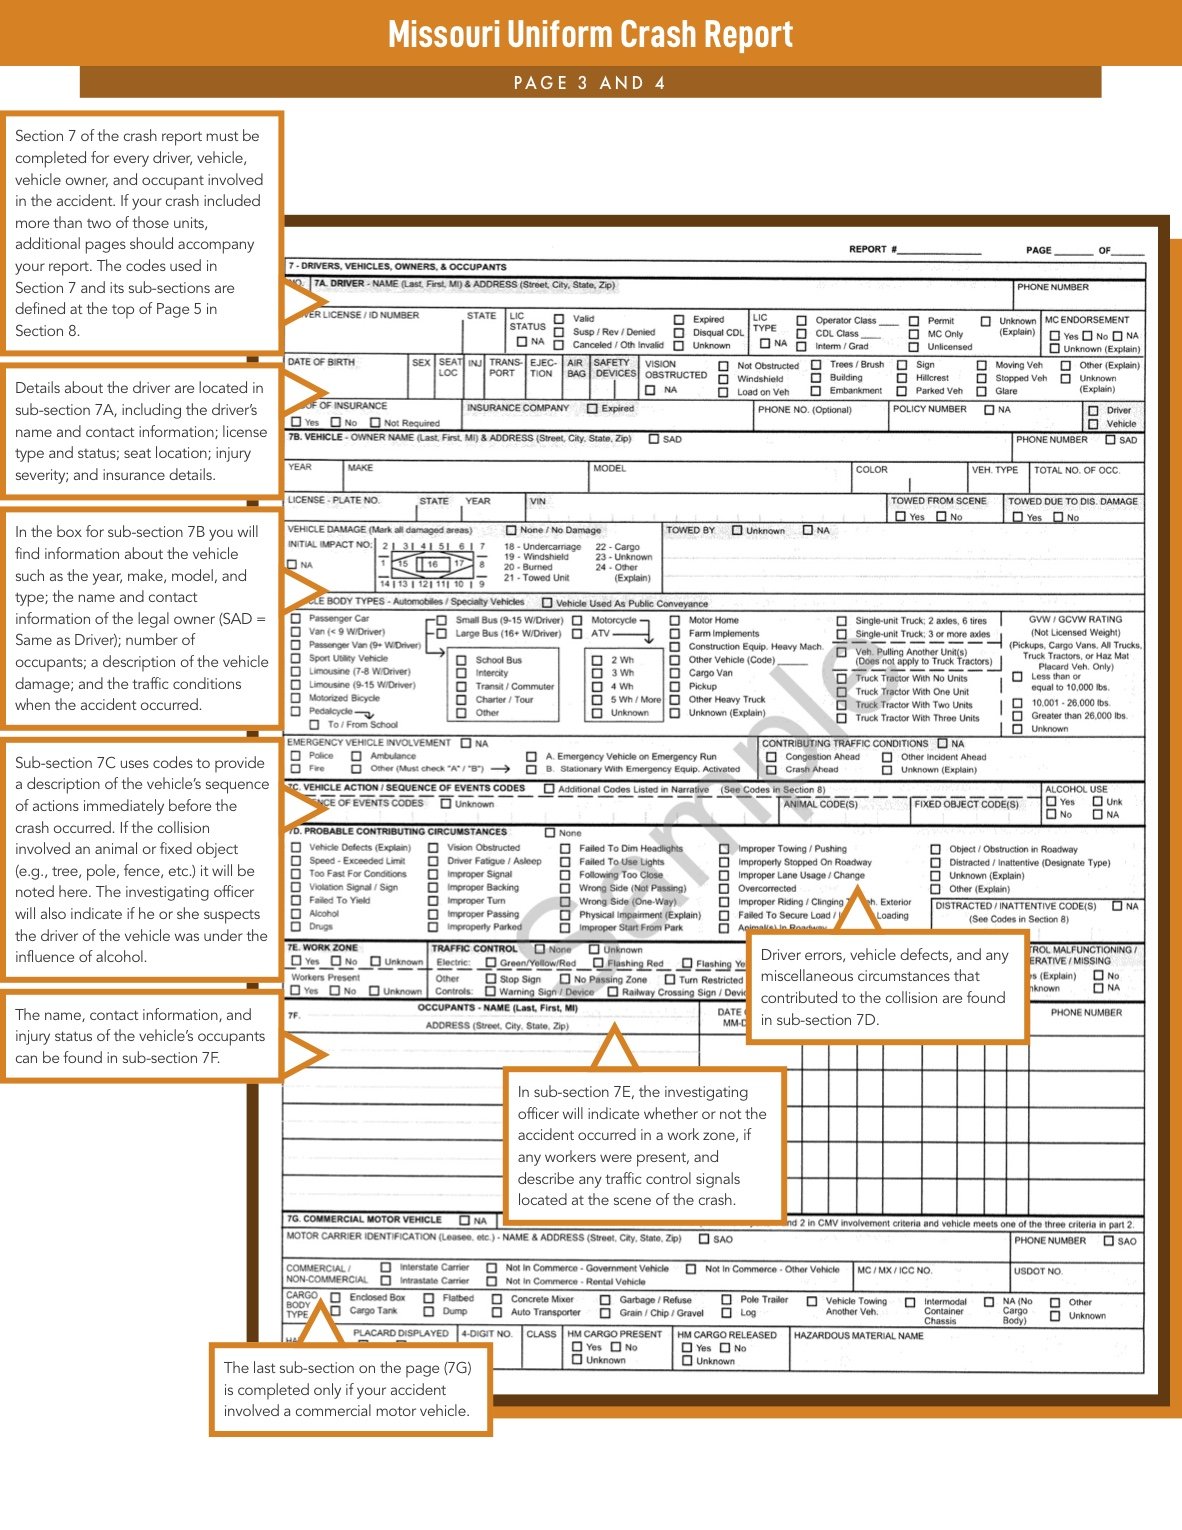 Missouri Accident Report pages 3 and 4